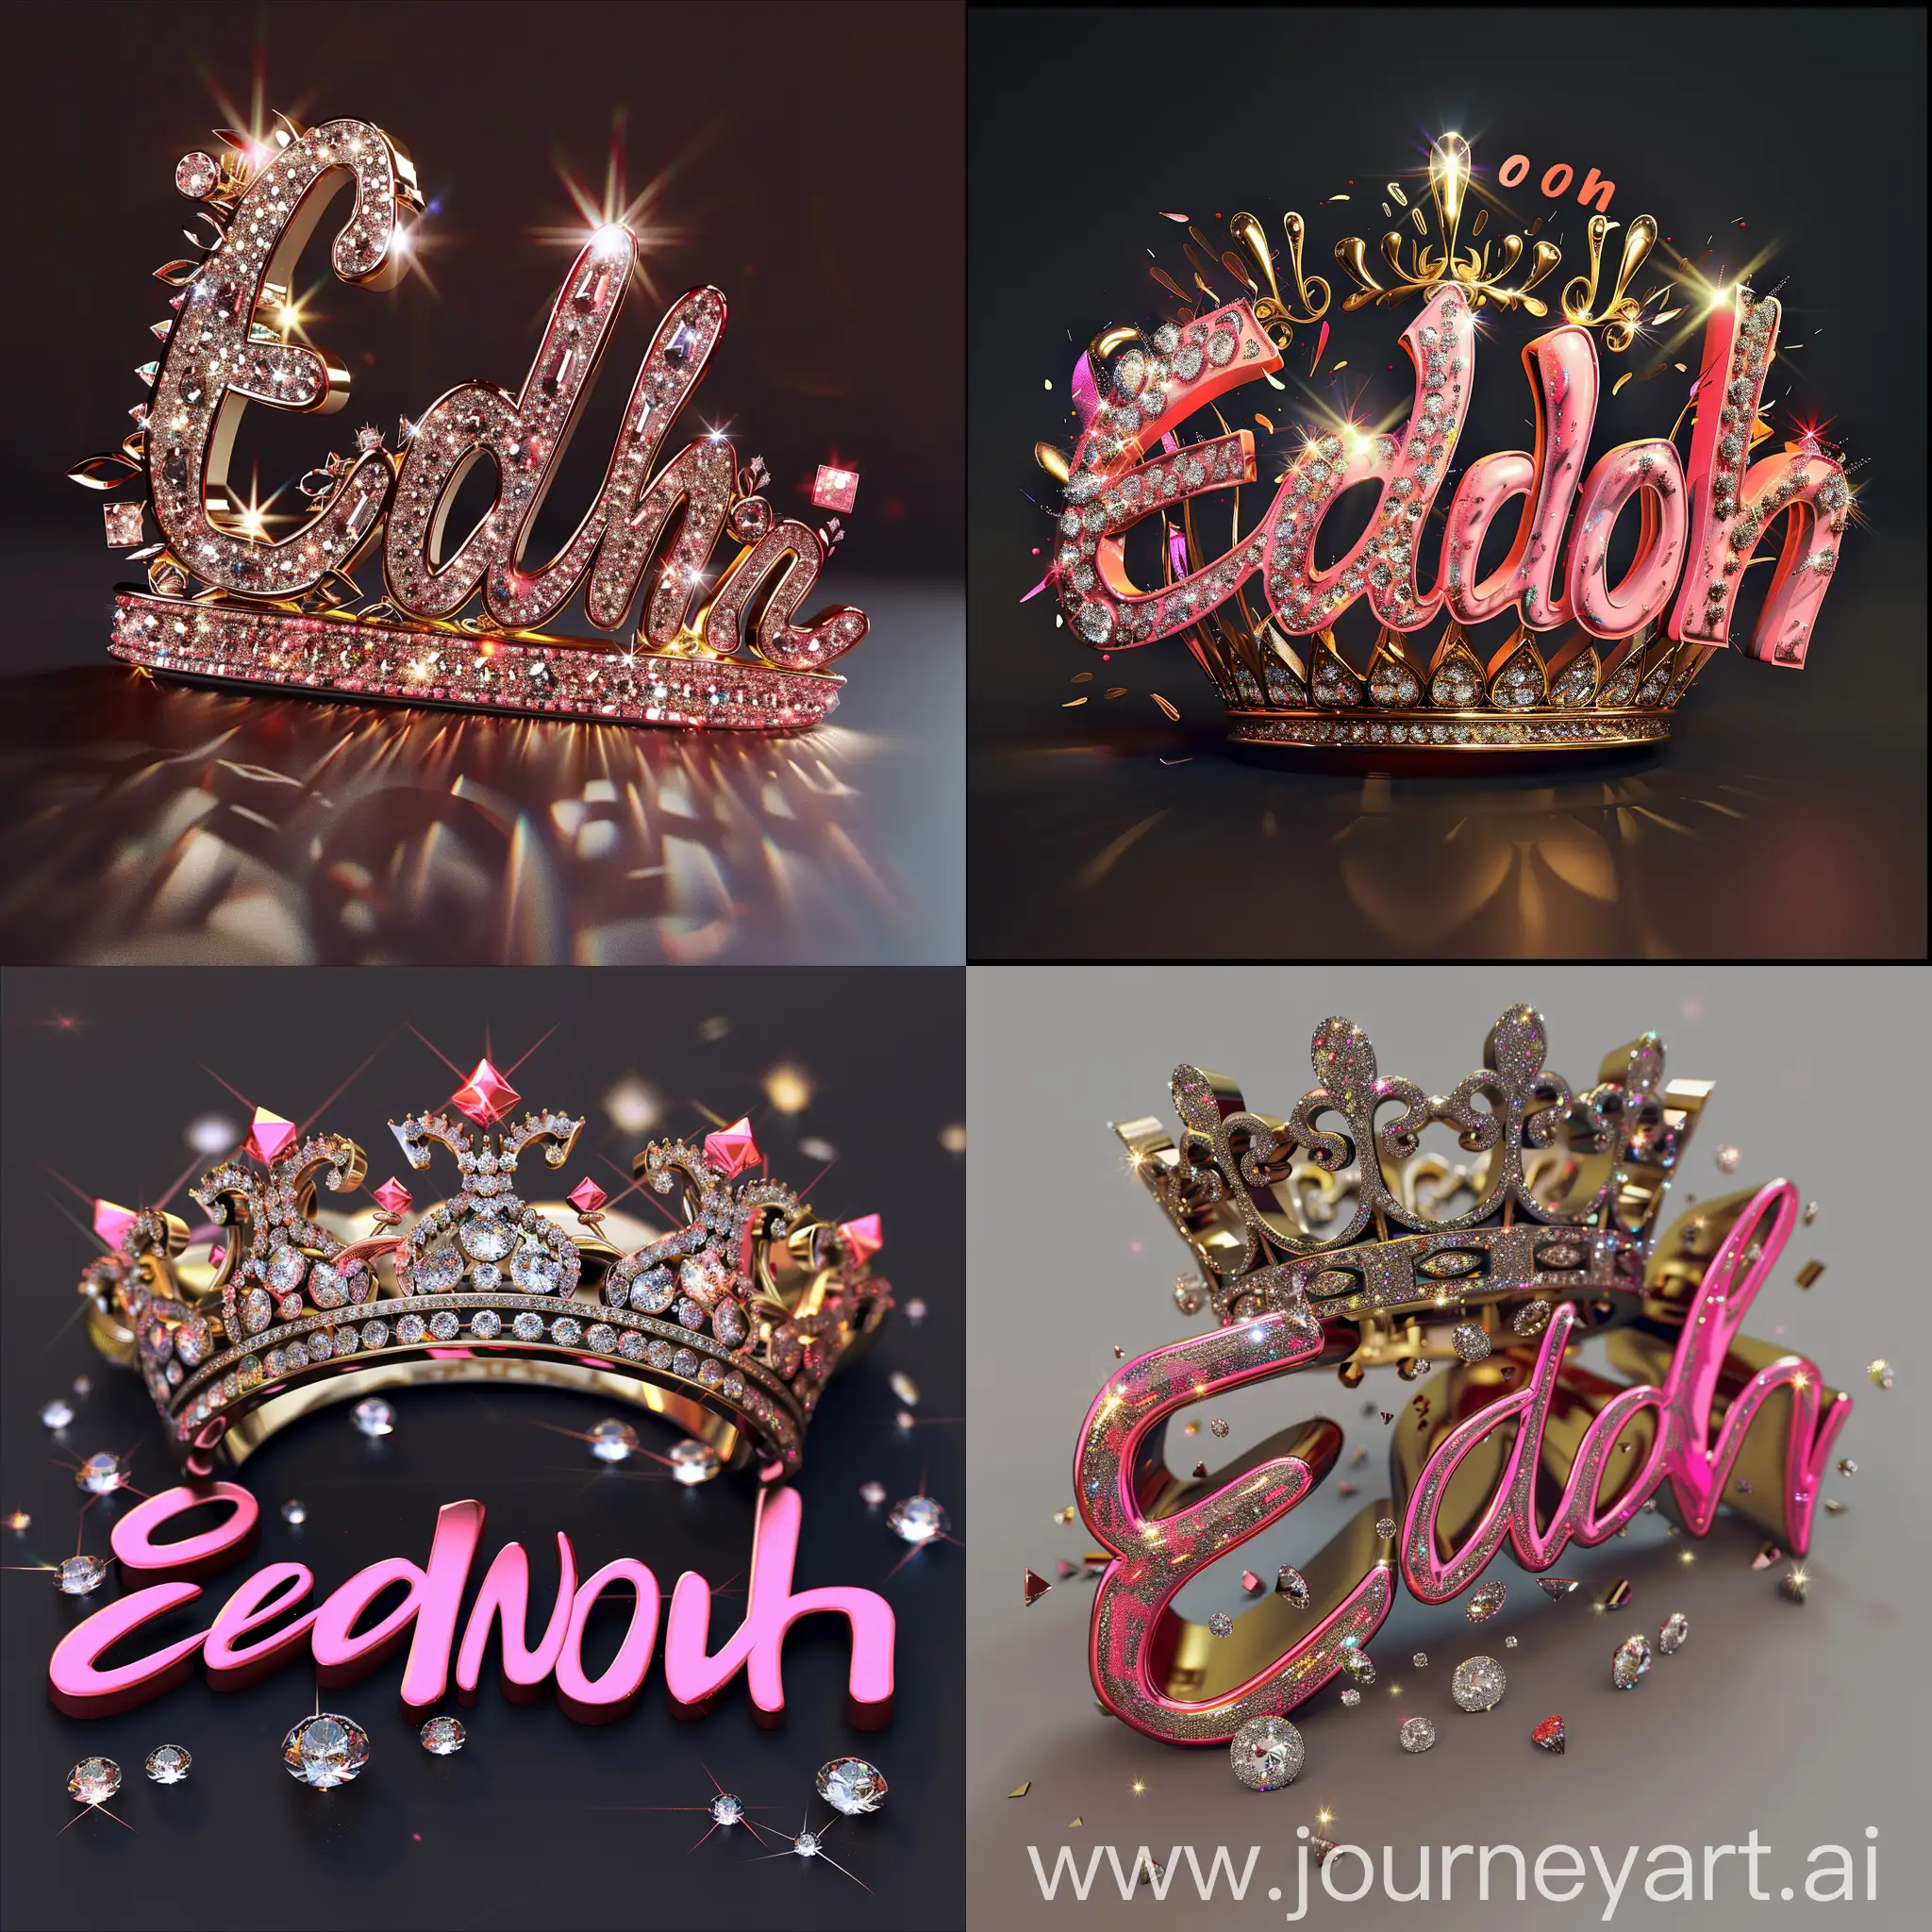 Elegant 3D typography with the name. "Edwoh" 
plwith an elegant crown ande Helpfine diamonds with sparkles of bright colorsand , photo, typography,vibrantv0.1, graffiti, illustration, photo,product, fashion, 3d render, typography